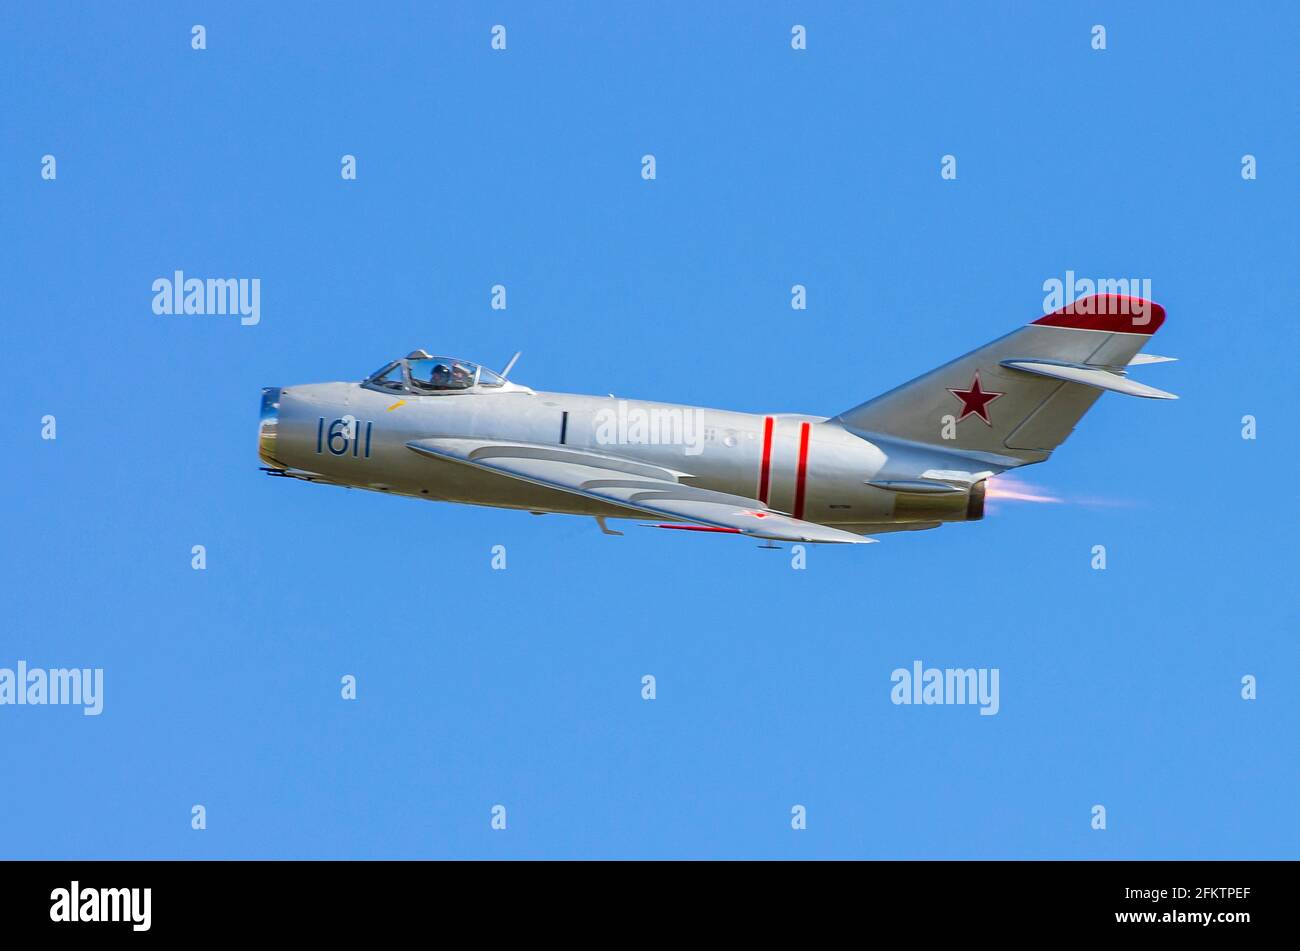 The Mikoyan-Gurevich MiG-17 is a high-subsonic fighter aircraft produced in the USSR from 1952 and operated by numerous air forces in many variants. Stock Photo